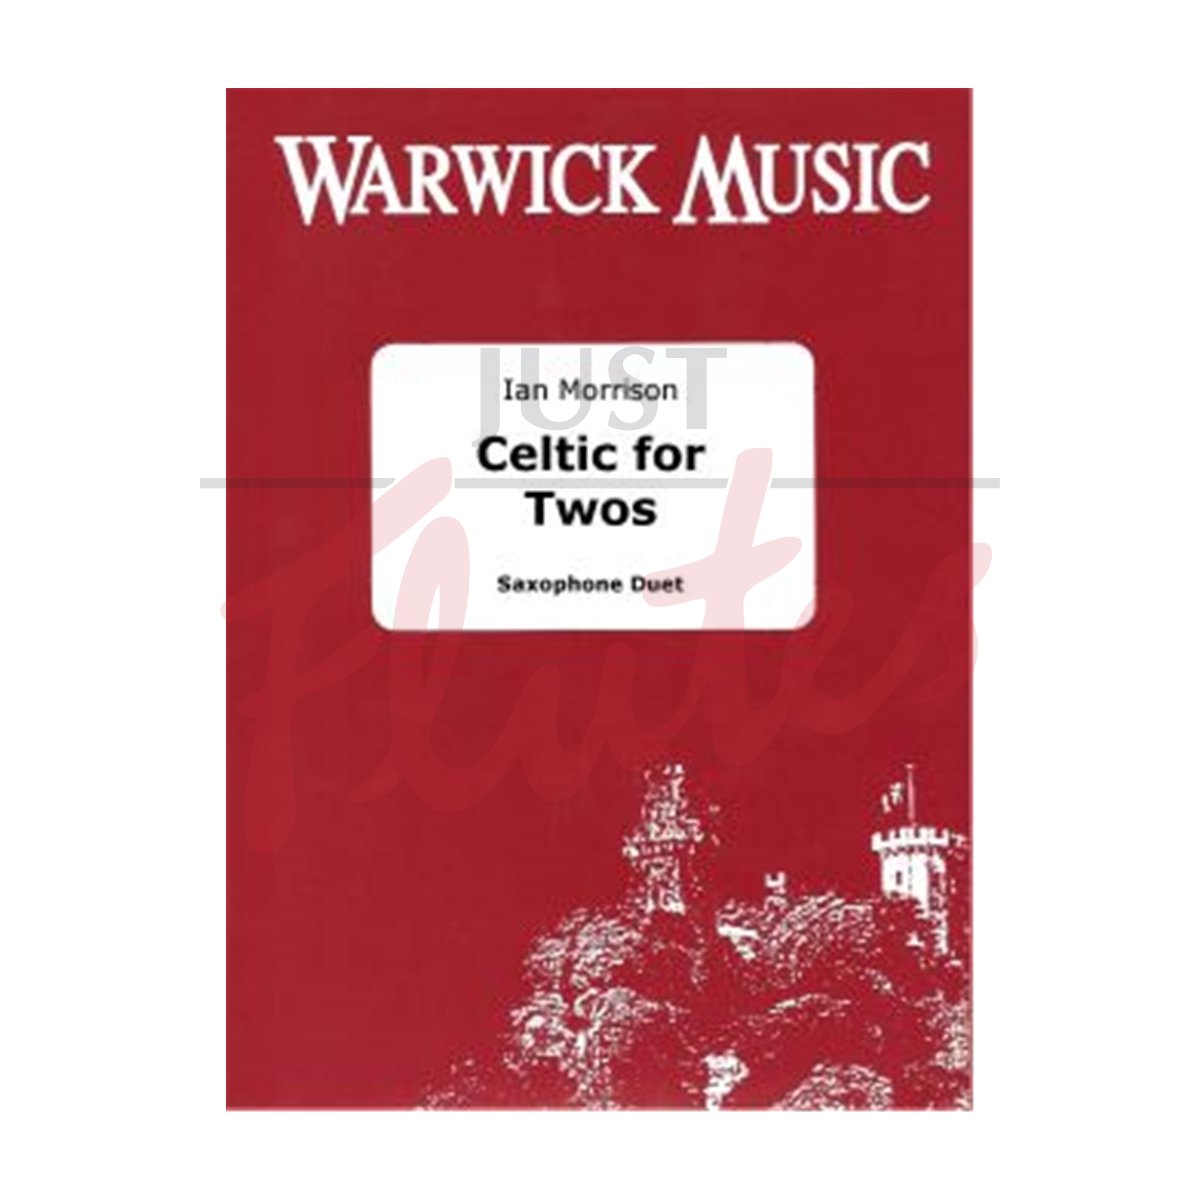 Celtic for Twos for Saxophone Duet